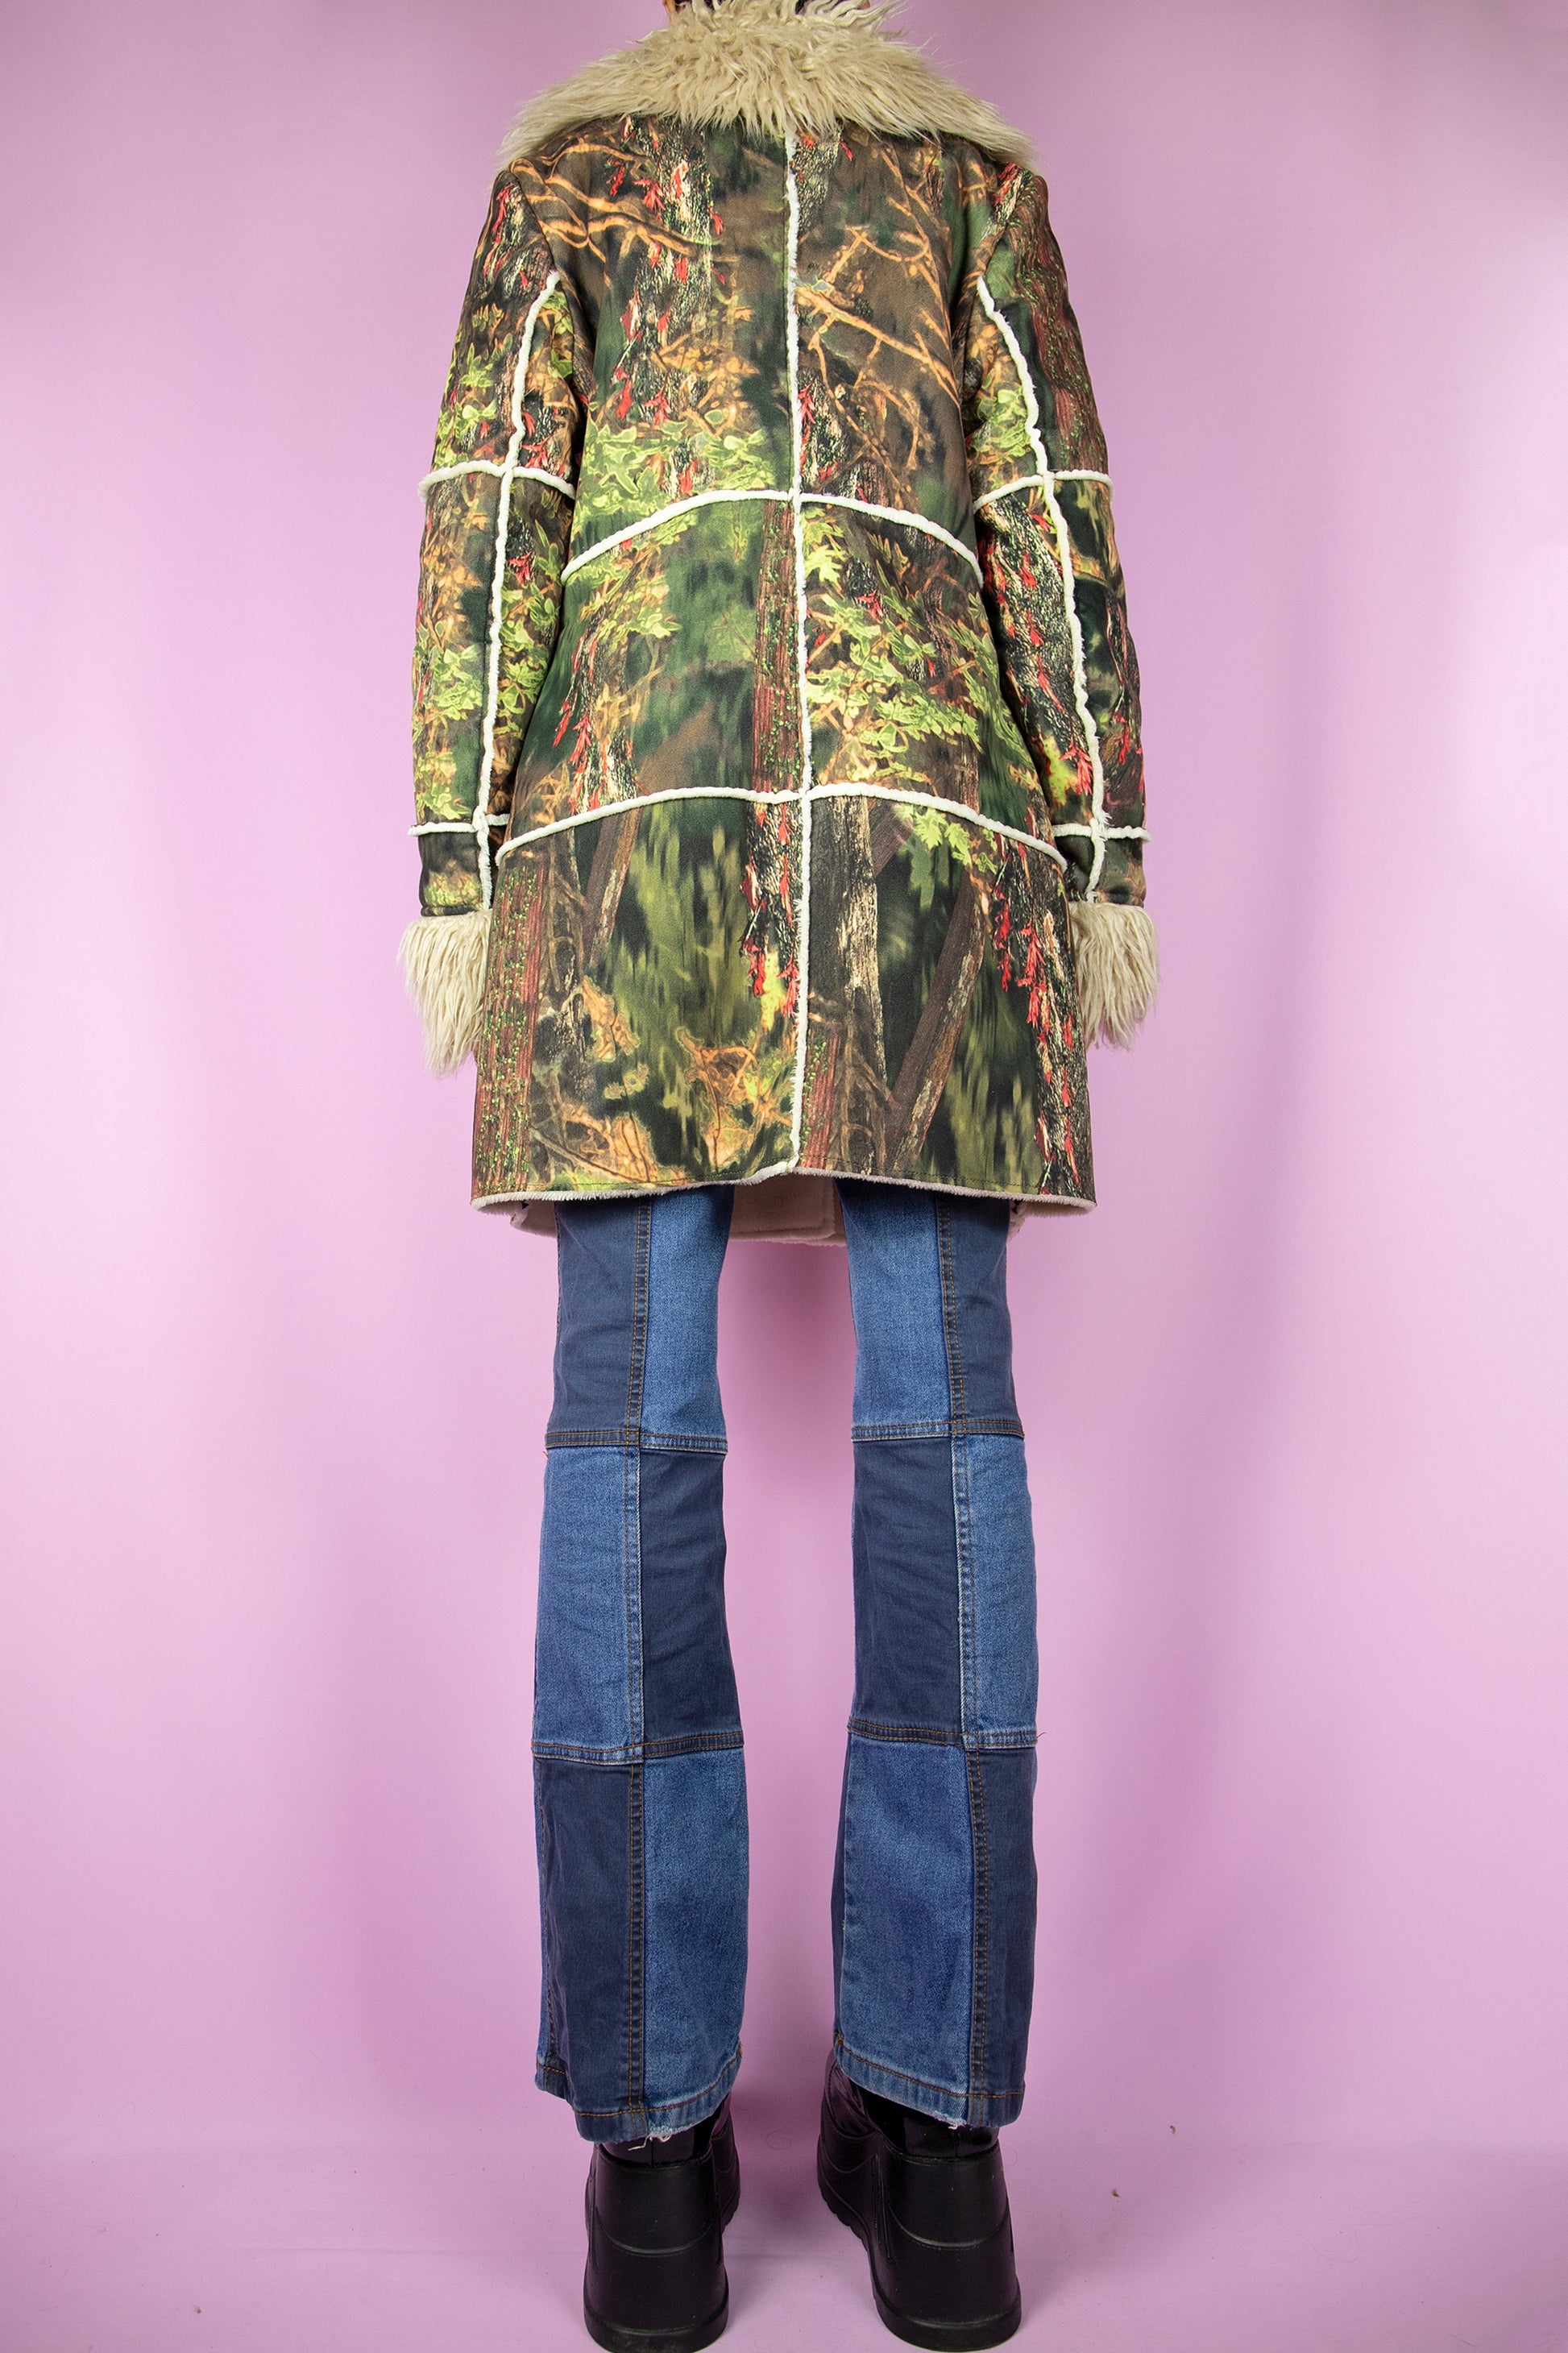 The Y2K Green Penny Lane Coat is a vintage abstract forest graphic printed jacket with beige faux fur collar and cuffs, pockets and toggle closure. Cyber boho 2000s afghan style winter statement coat.